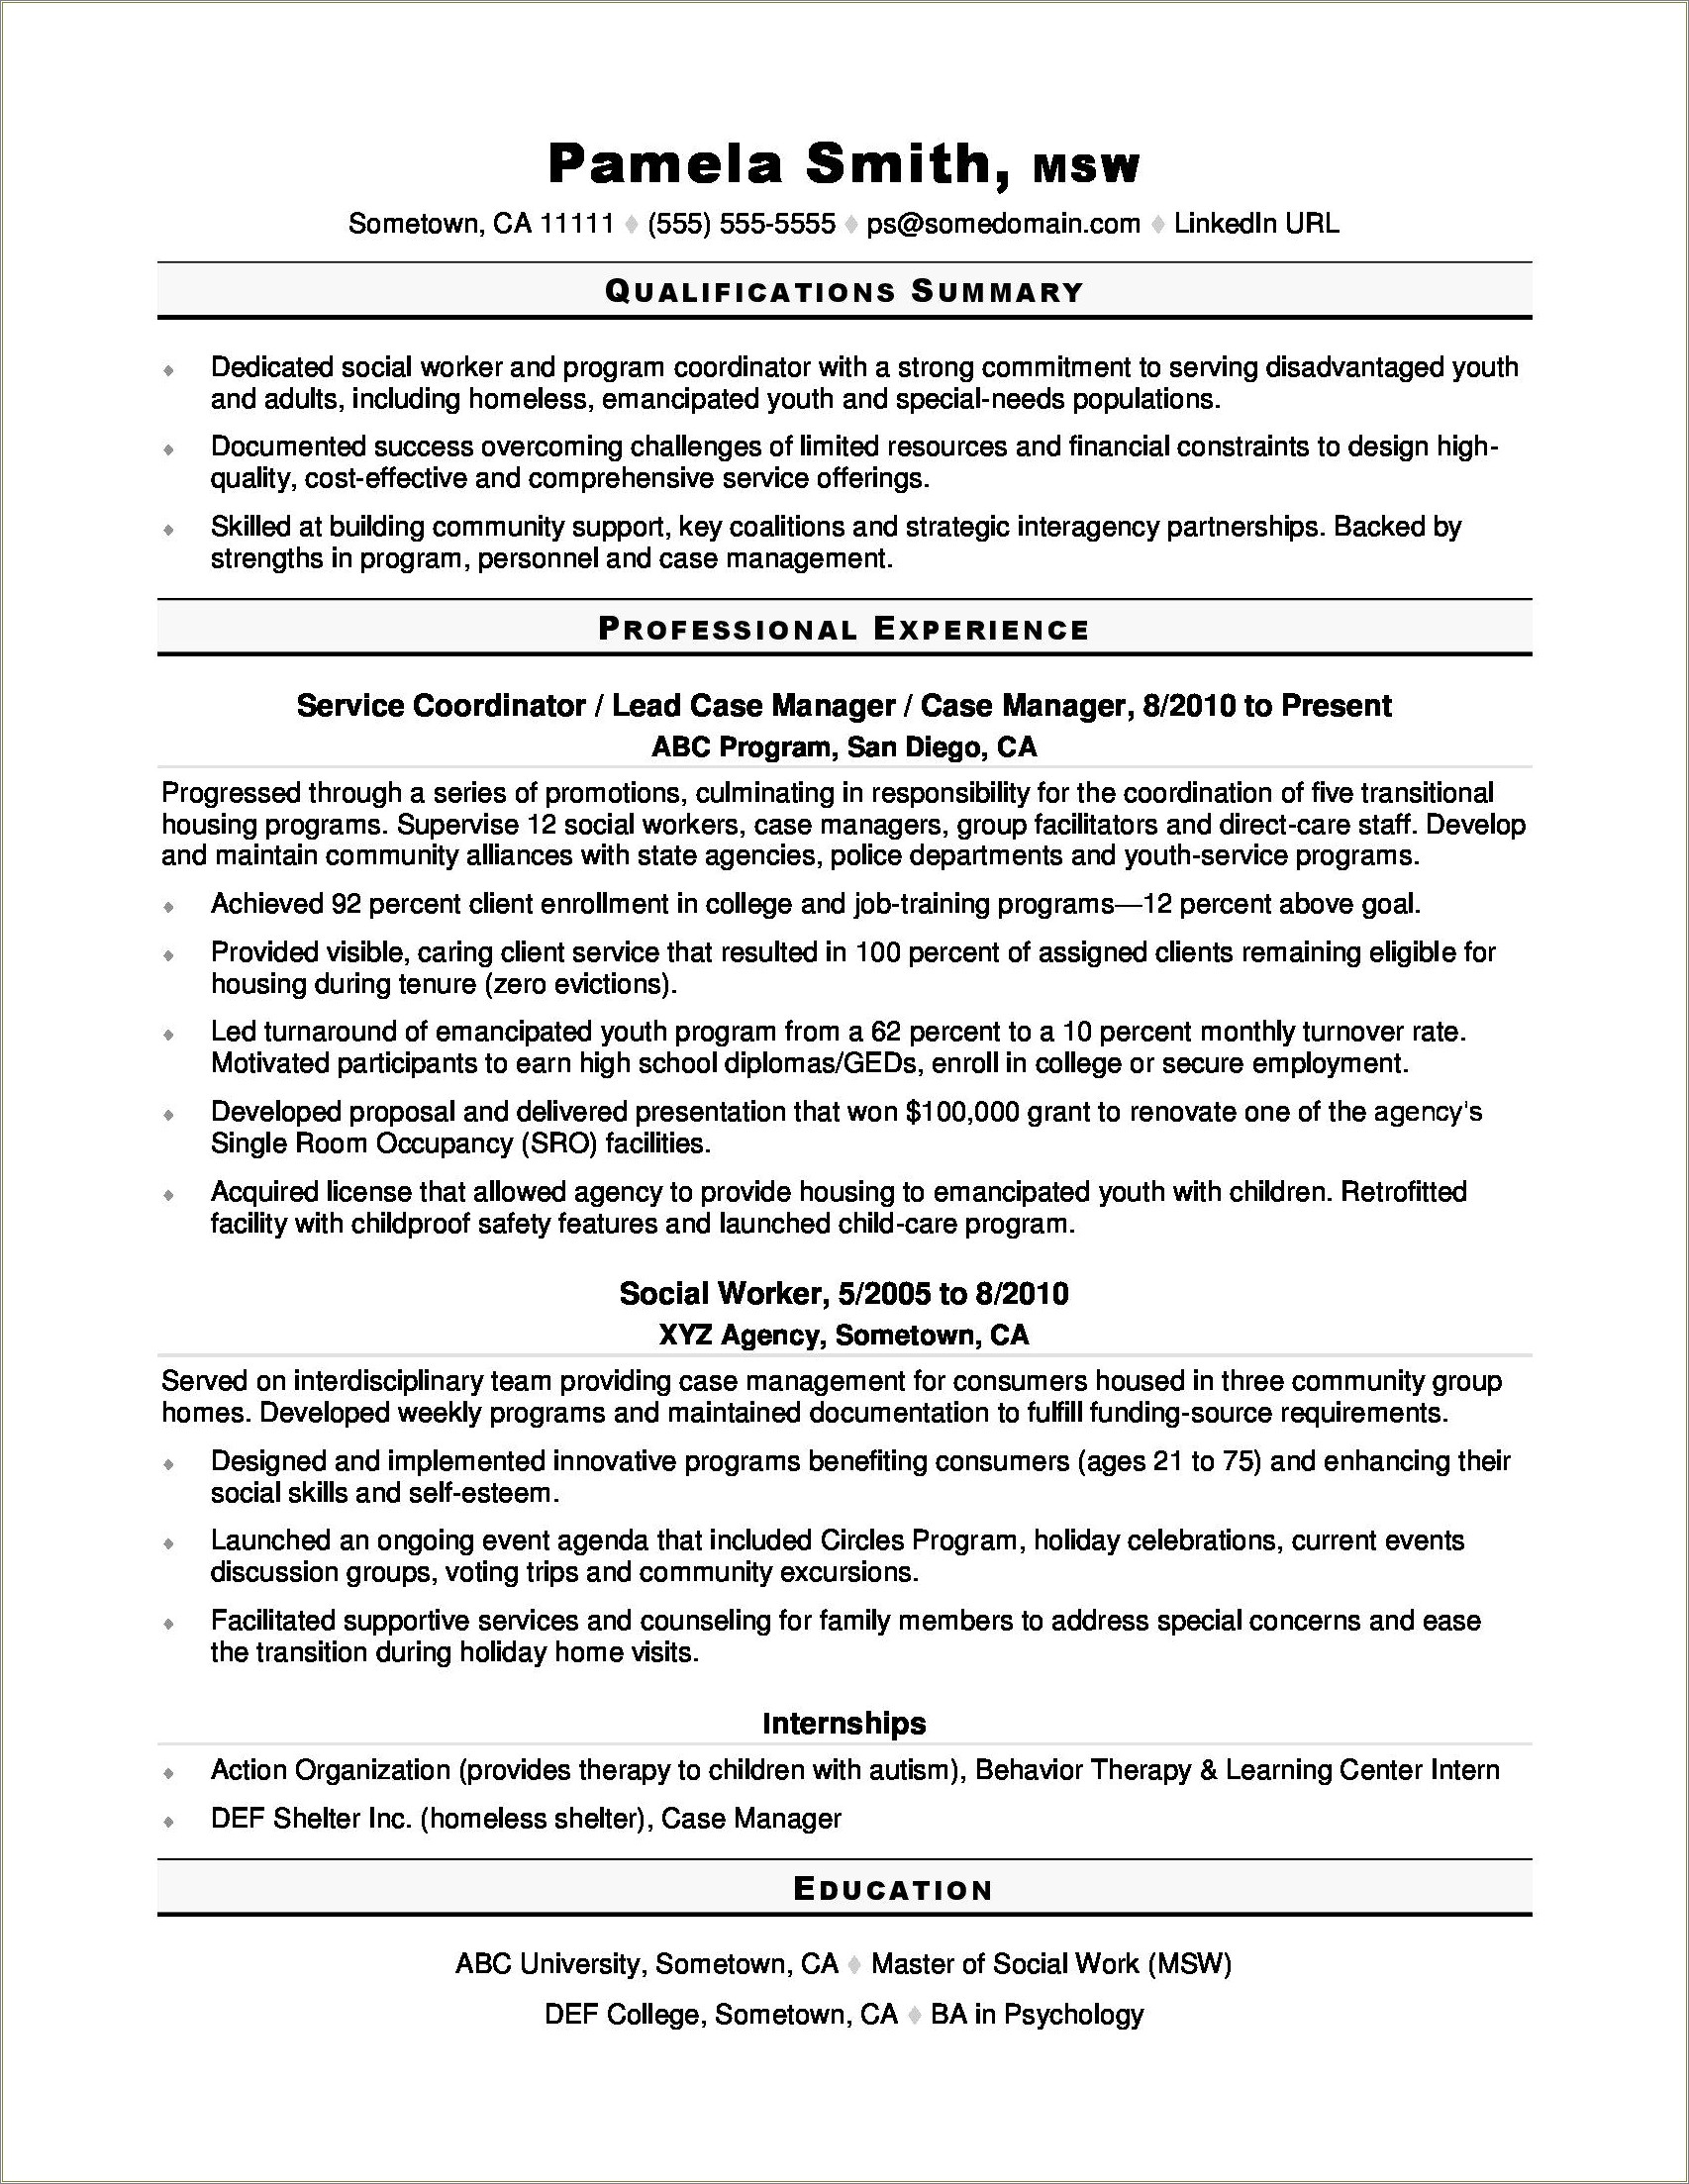 Resume Objective Statement For Social Services